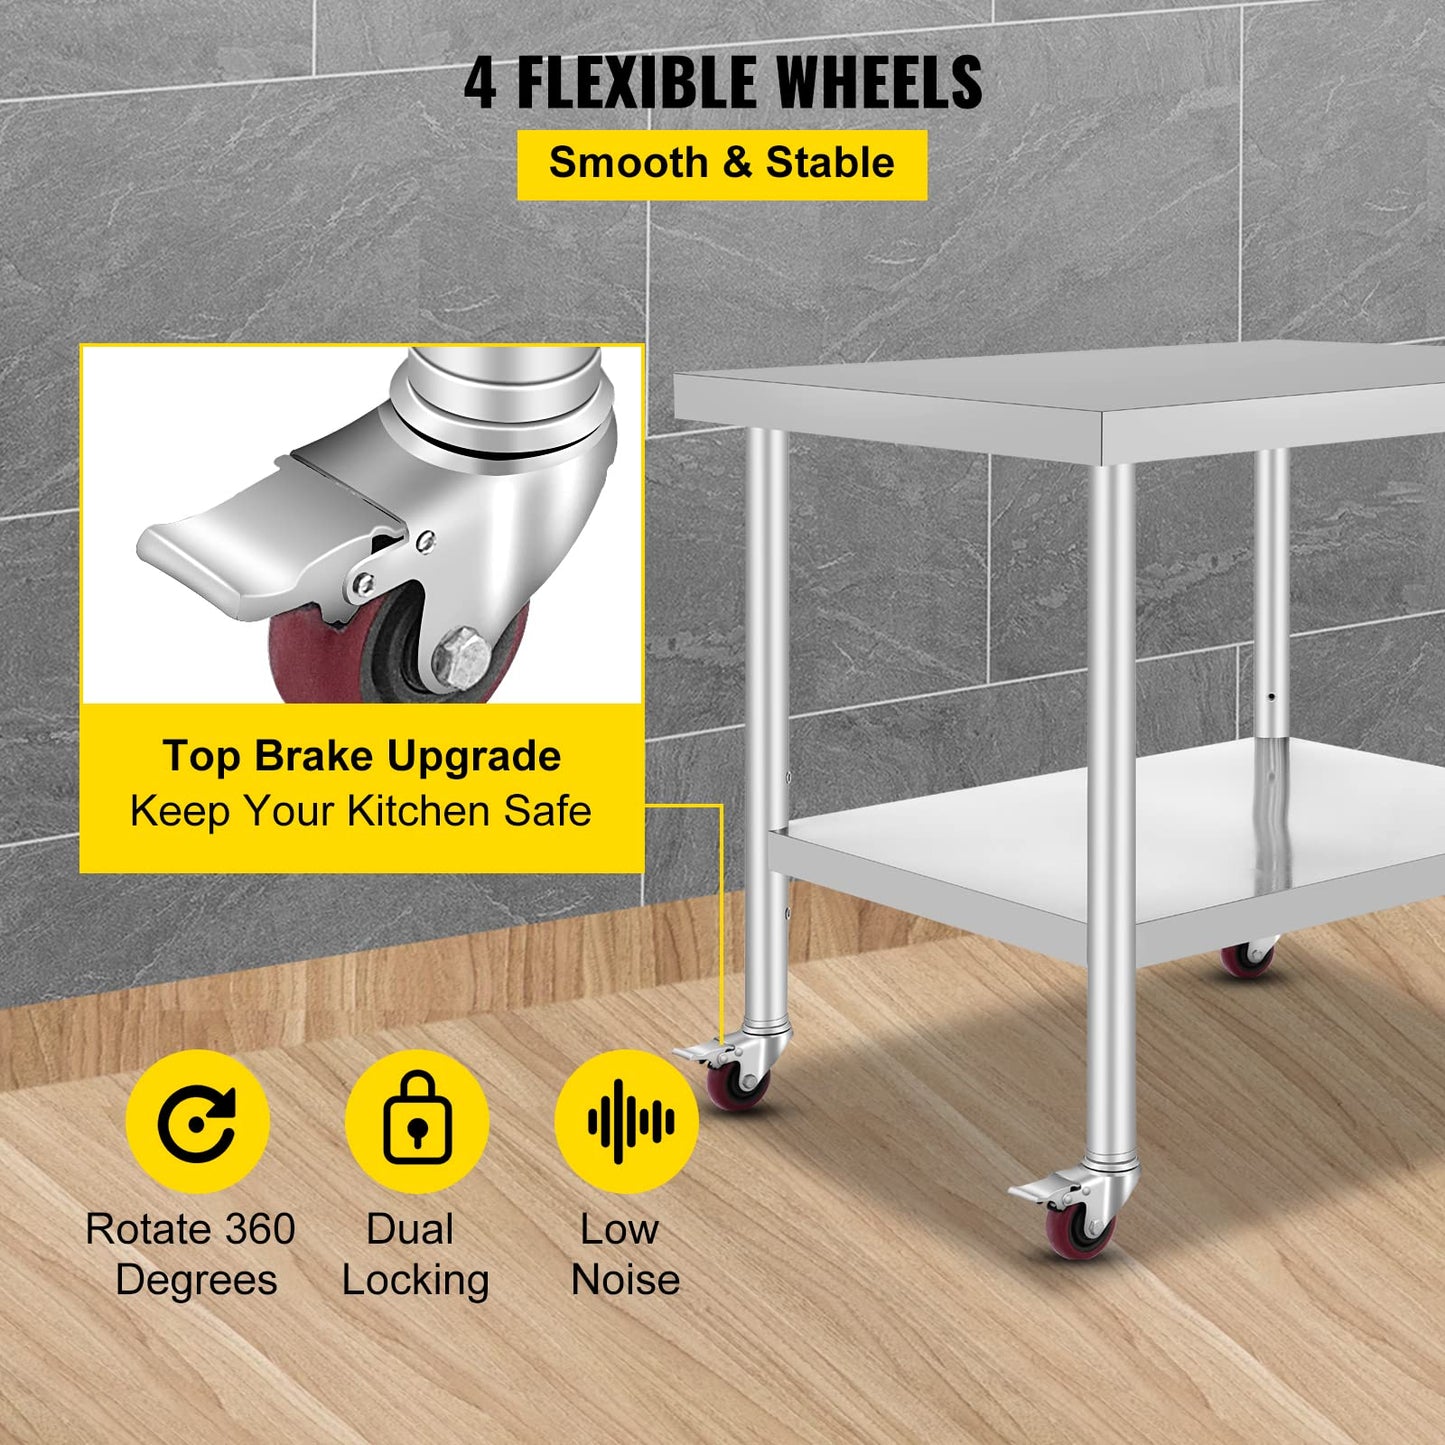 Mophorn 30x36x34 Inch Stainless Steel Work Table 3-Stage Adjustable Shelf with 4 Wheels Heavy Duty Commercial Food Prep Worktable with Brake for Kitchen Prep Work